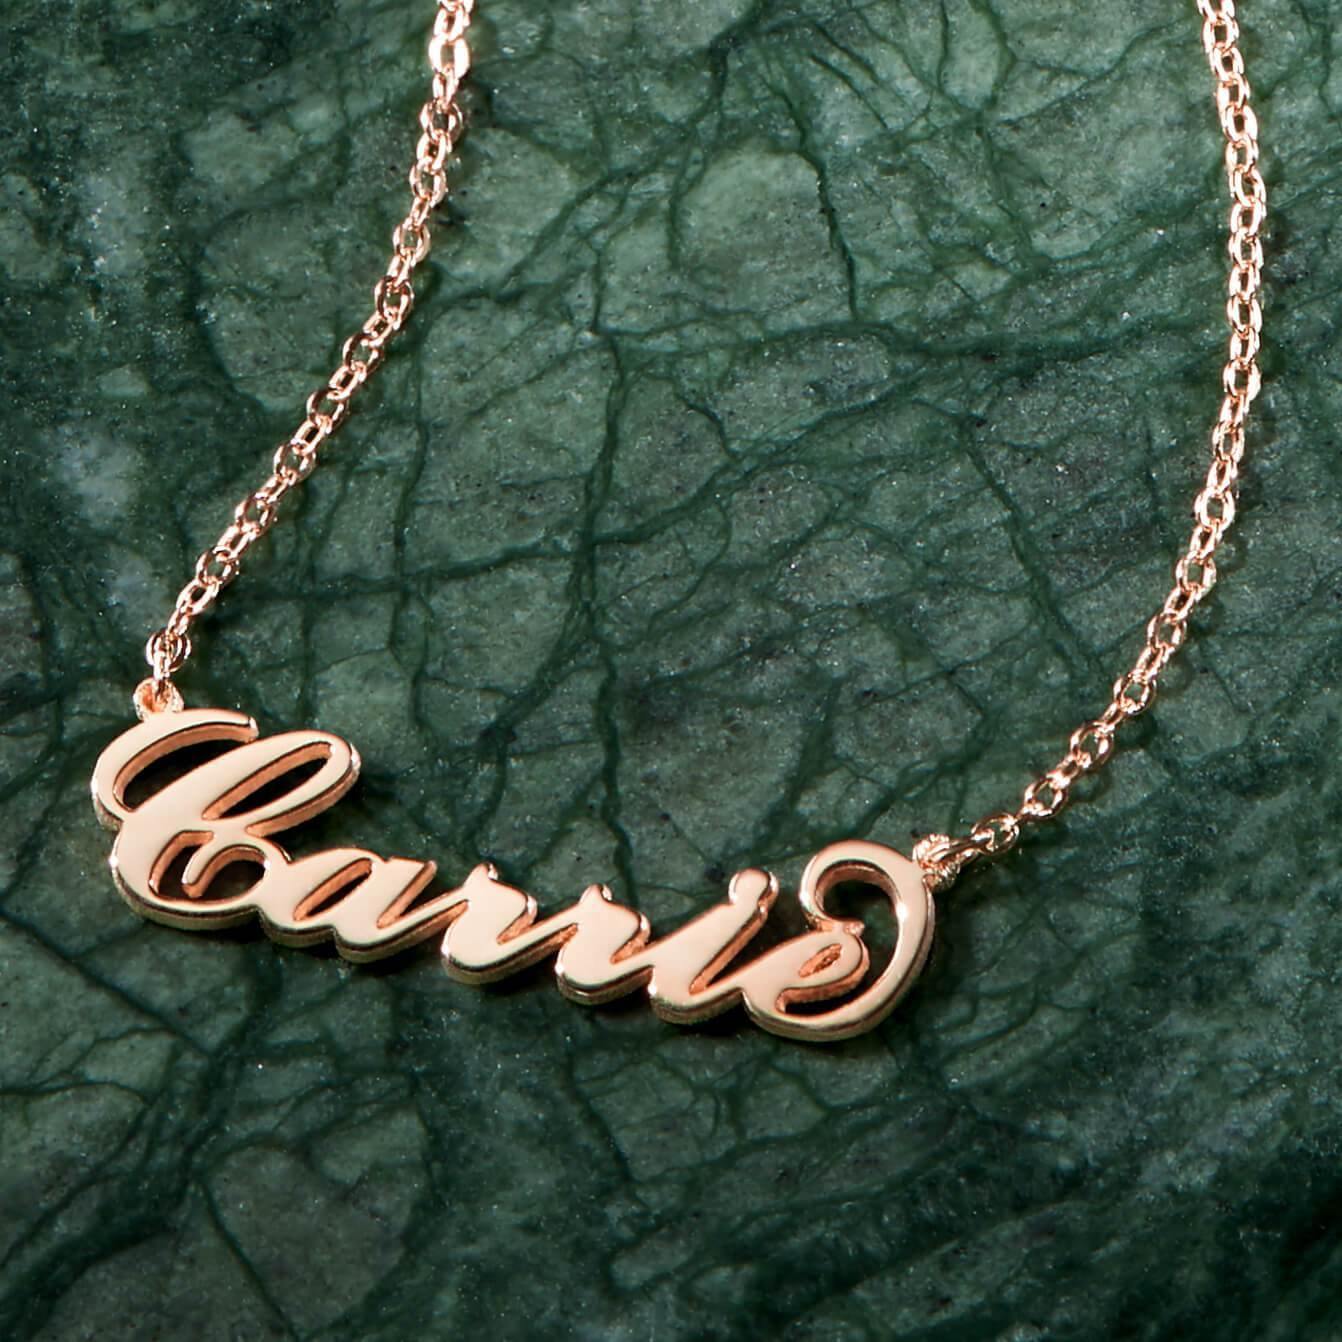 Soufeel Gold "Carrie" Style Name Necklace - soufeeluk